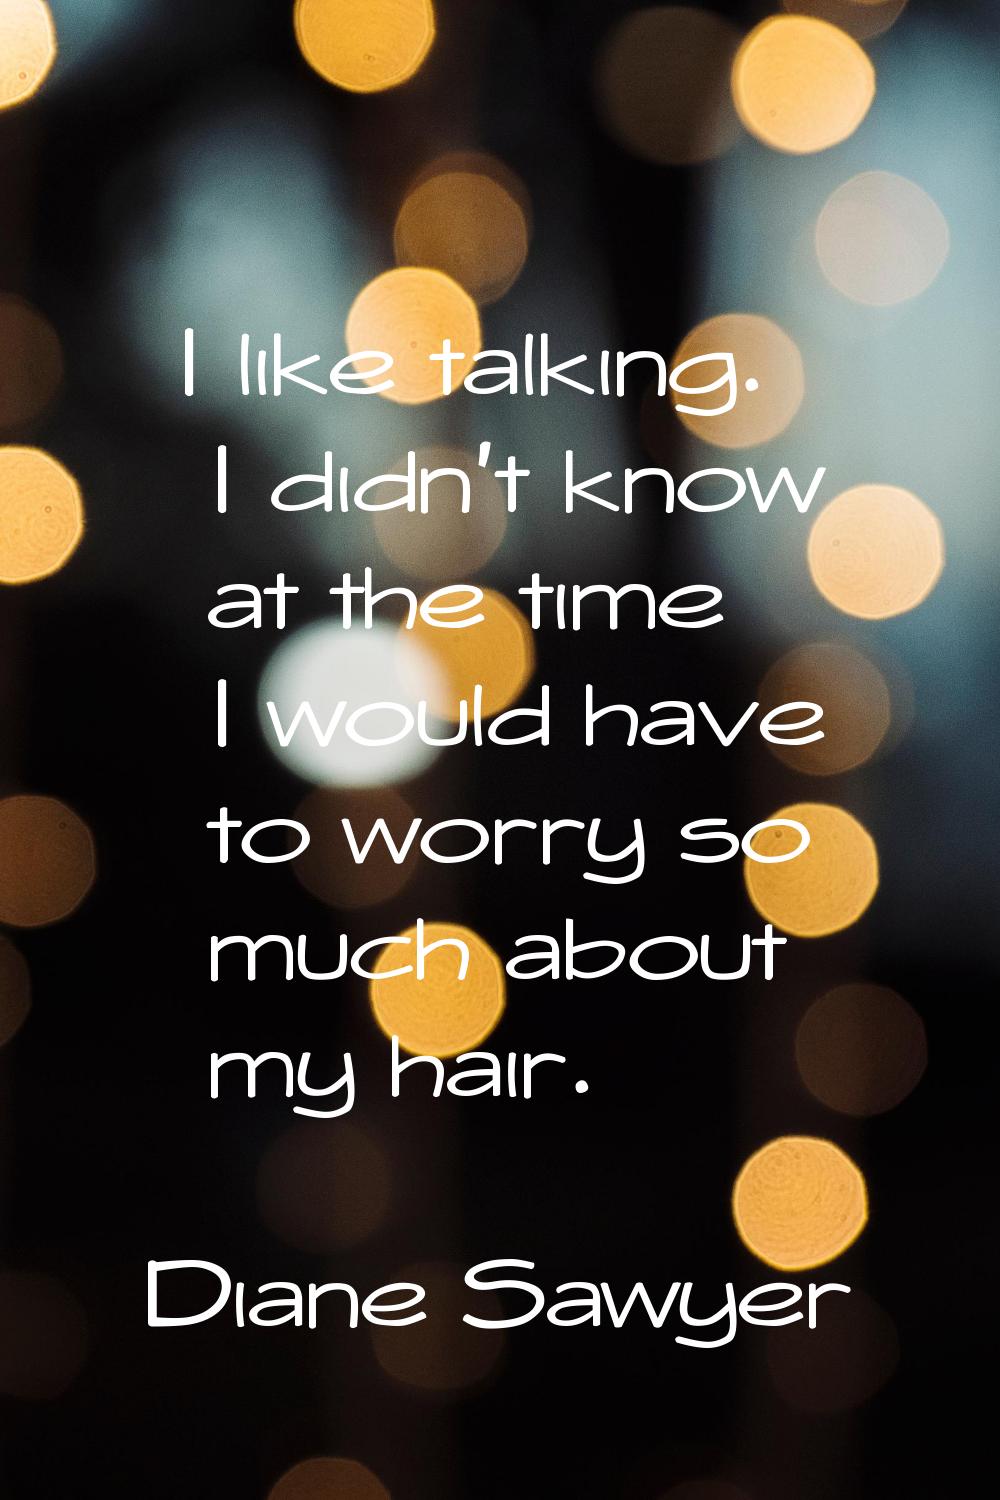 I like talking. I didn't know at the time I would have to worry so much about my hair.